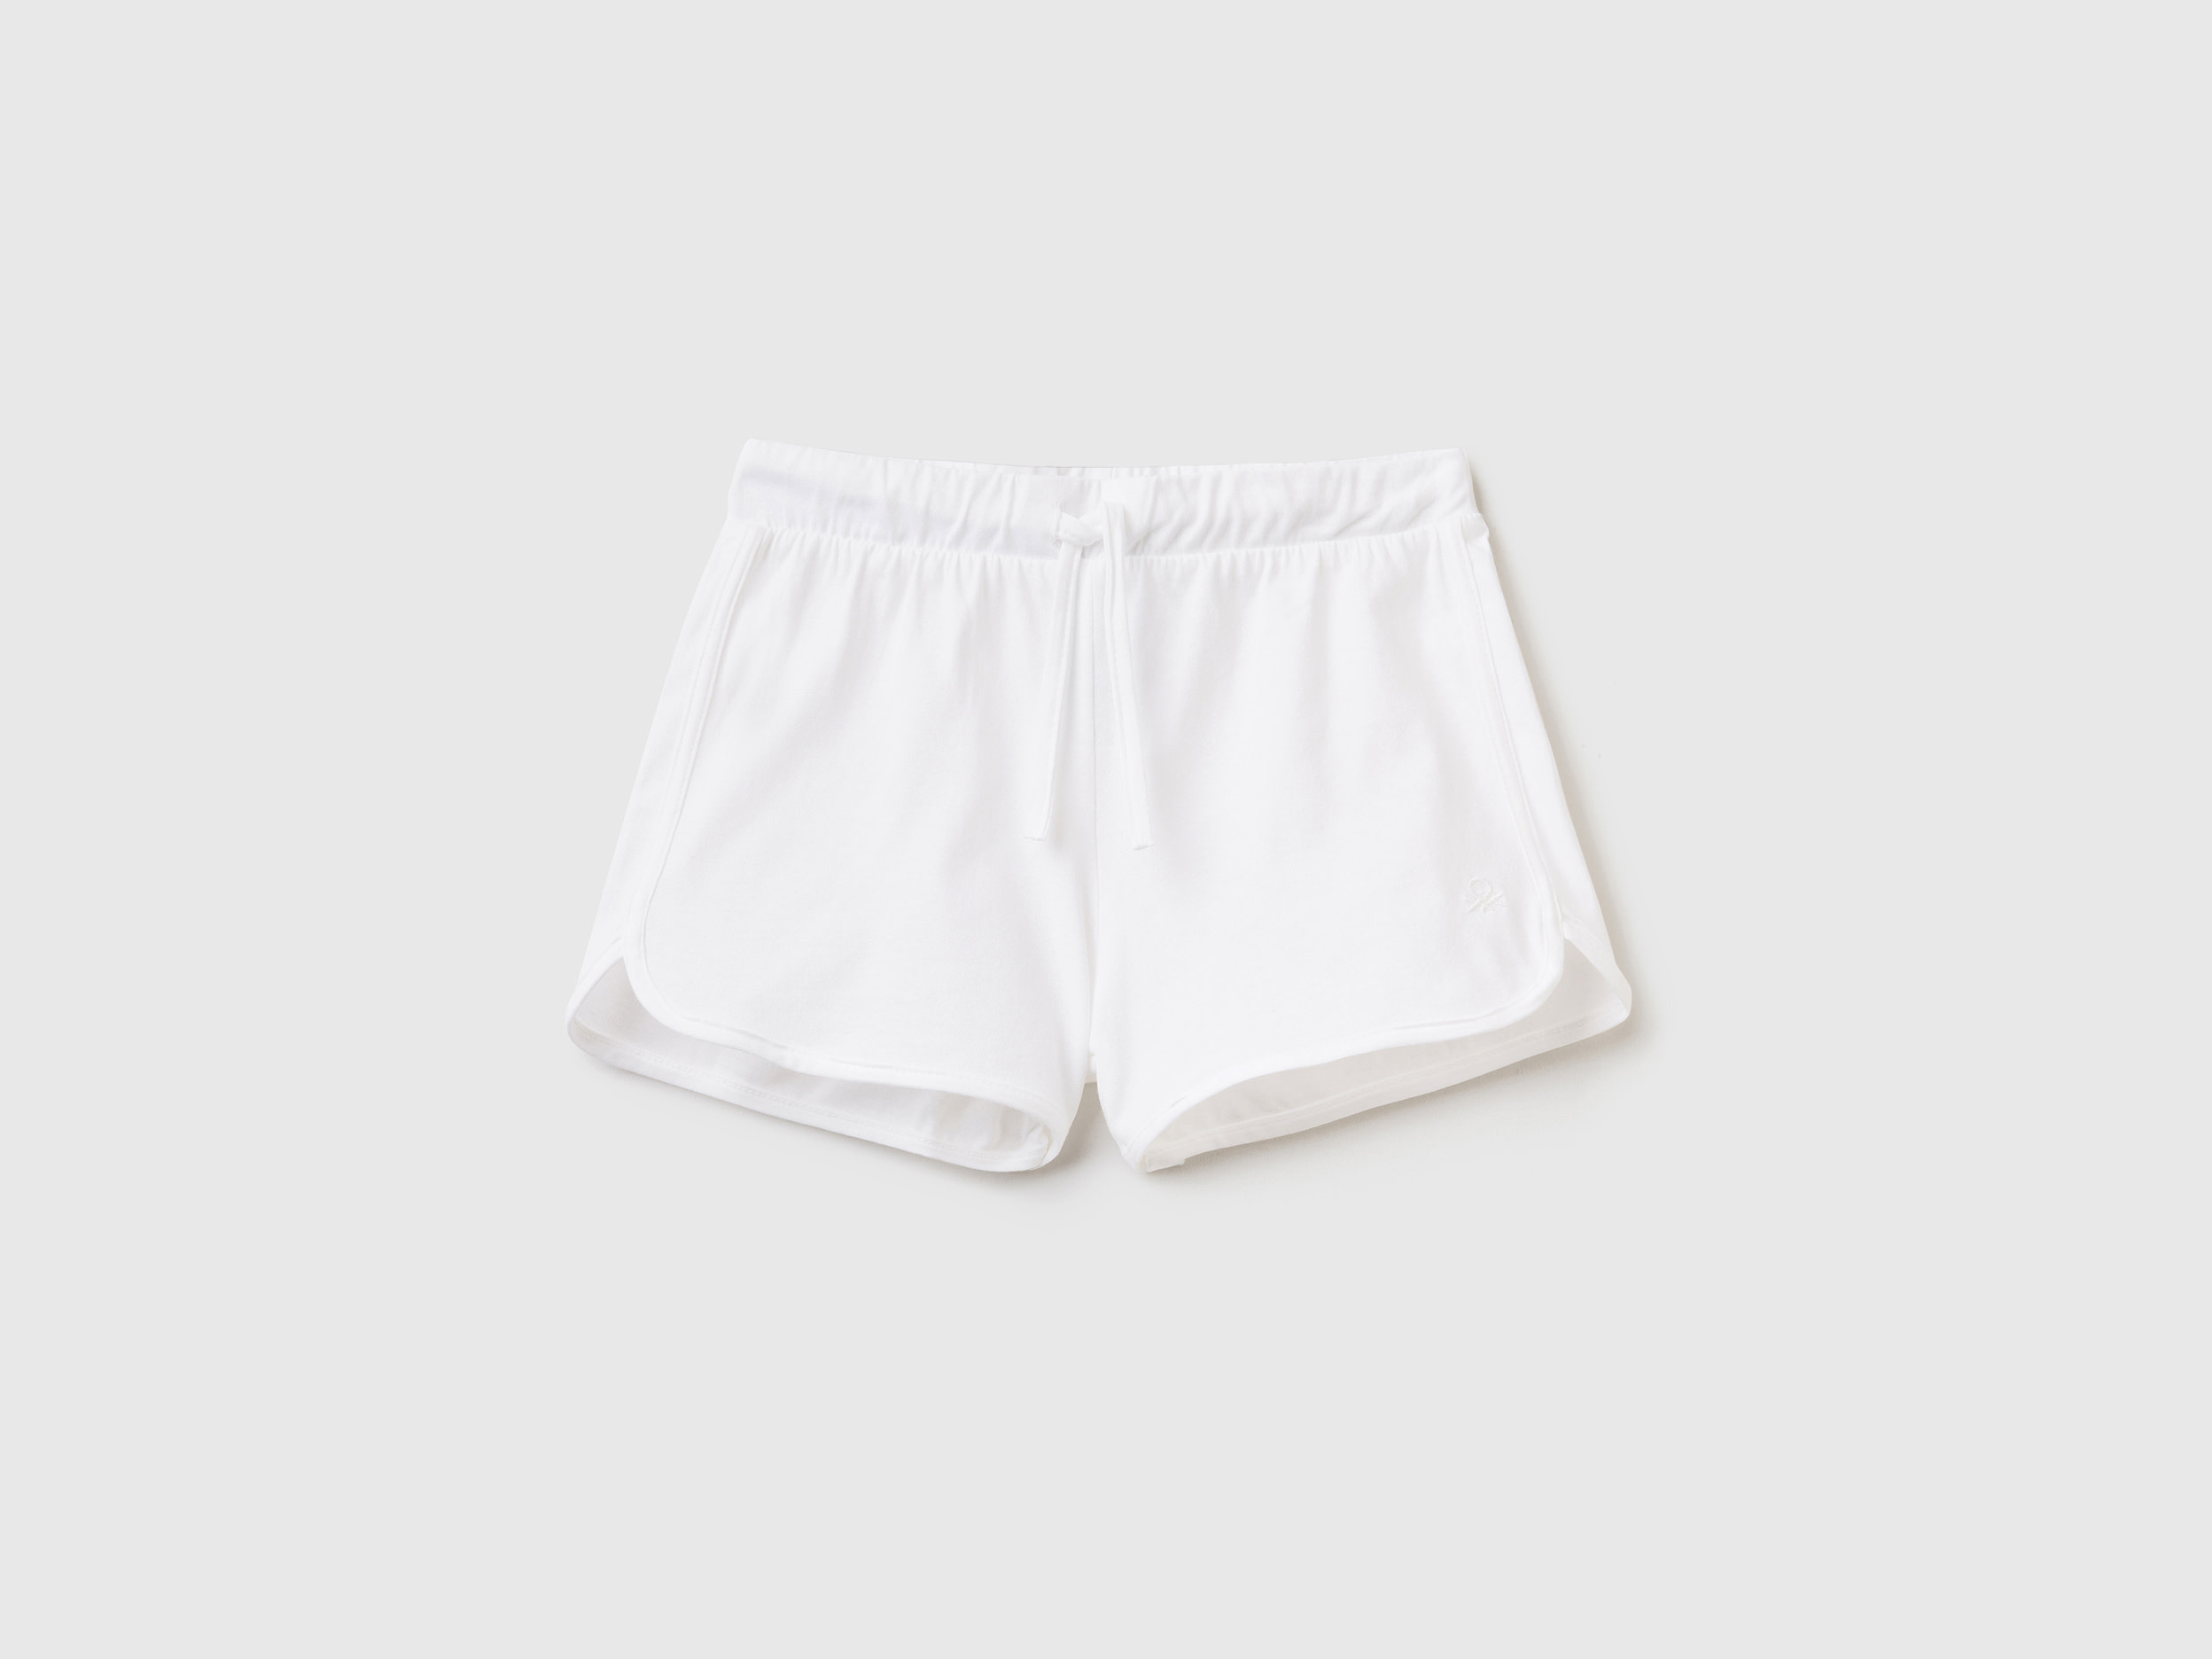 Image of Benetton, Runner Style Shorts In Organic Cotton, size 3XL, White, Kids